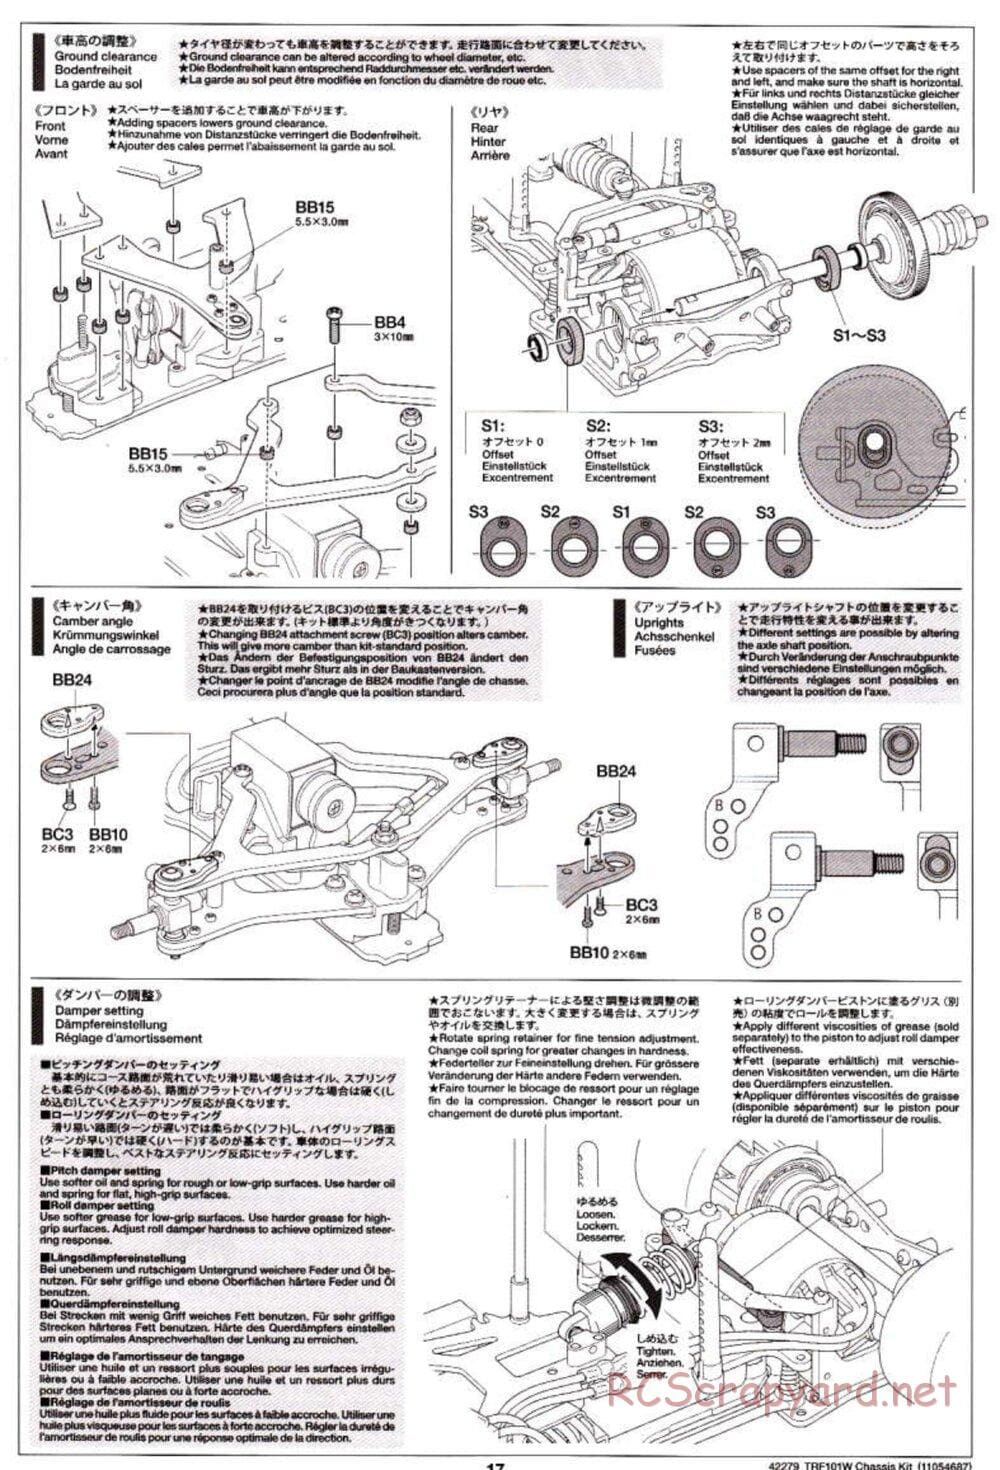 Tamiya - TRF101W Chassis Chassis - Manual - Page 17